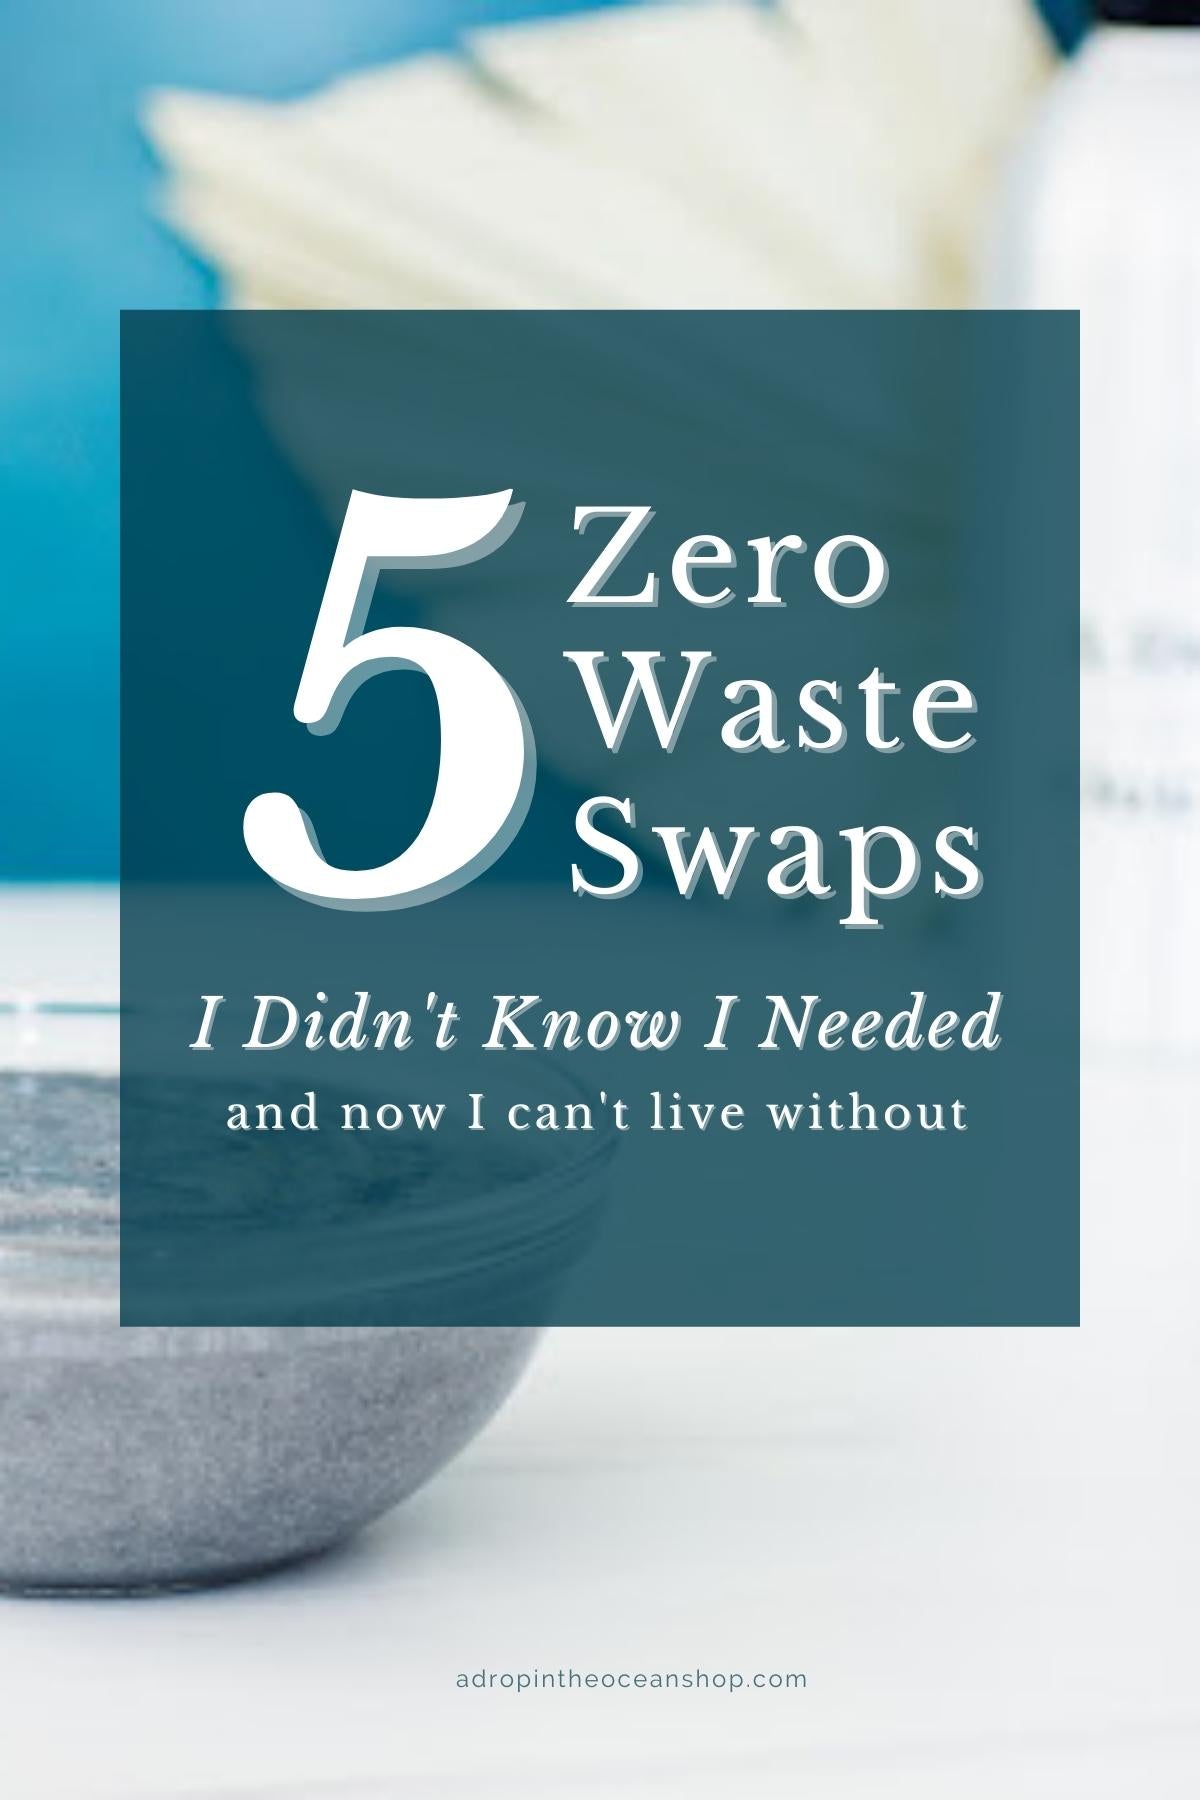 A Drop in the Ocean Tacoma Zero Waste Store 5 Swaps I Didn't Know I Needed